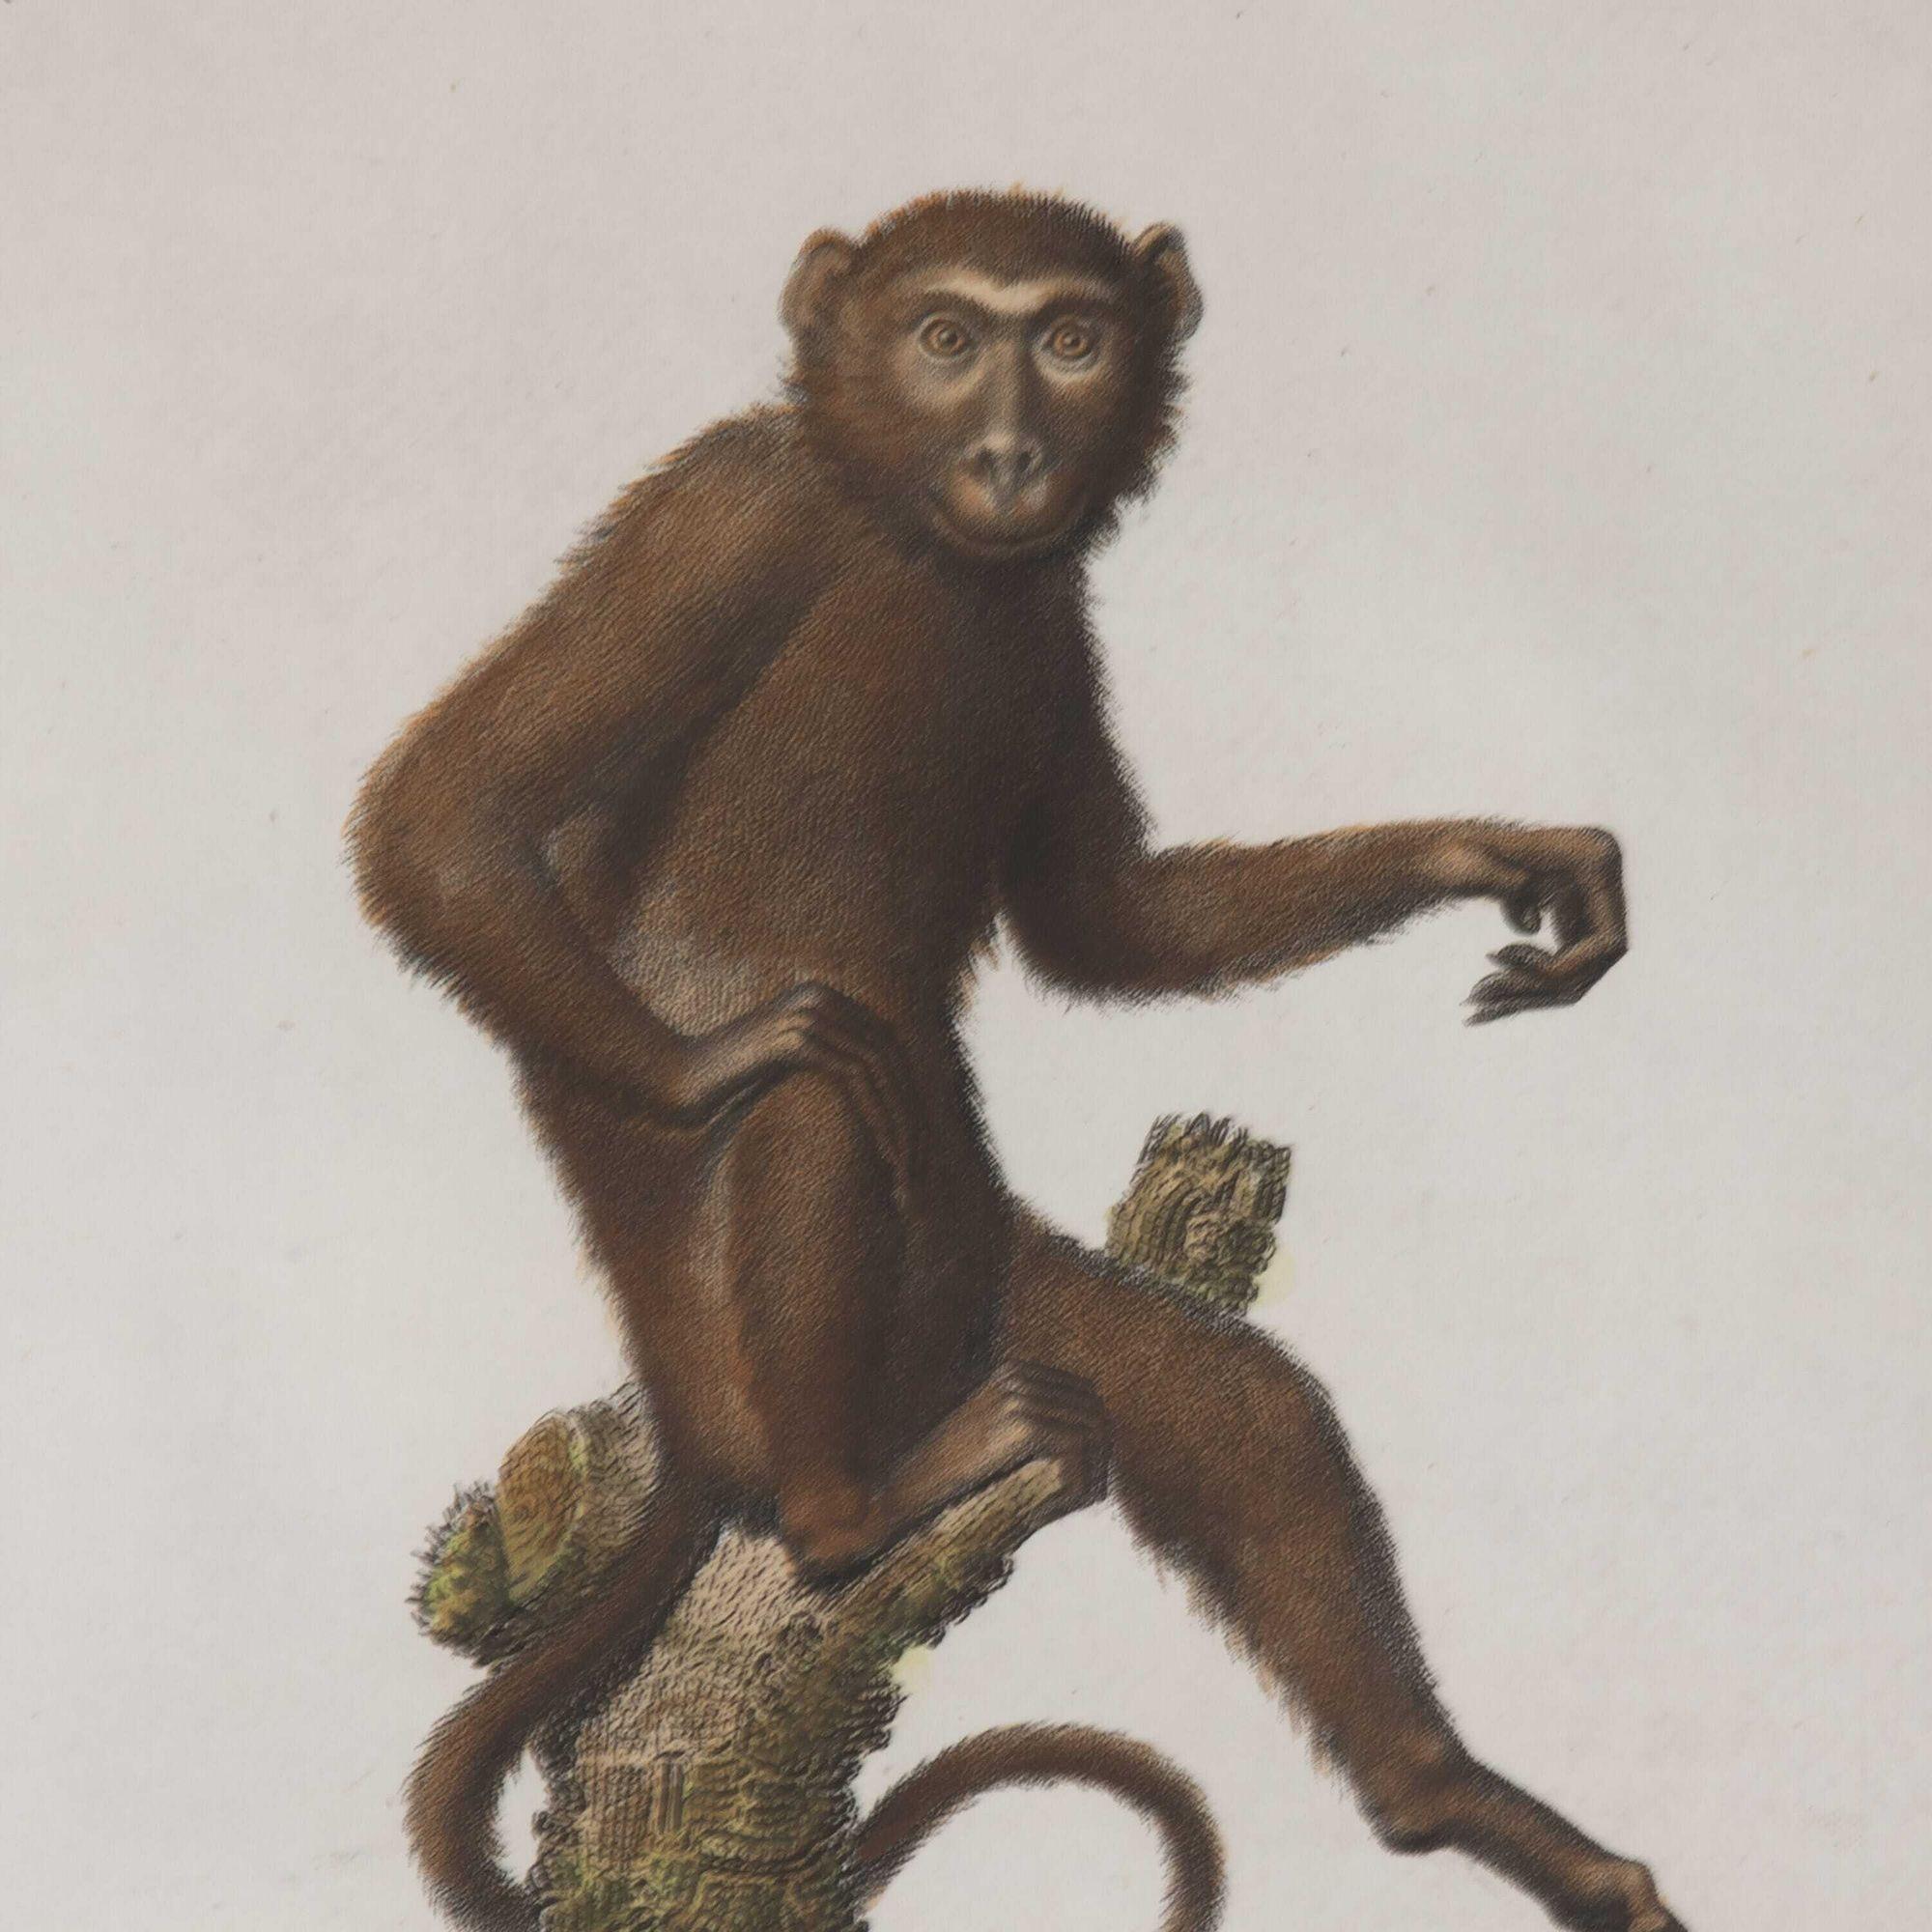 Set of six early 19th Century hand-coloured copperplate engravings of Jacob's Monkeys.
These wonderful naturalist illustrations were made around 1812 by J.H. Jacob.
Framed in hand-gilded rope twist frames with hessian mounts and AR70 Artglass for